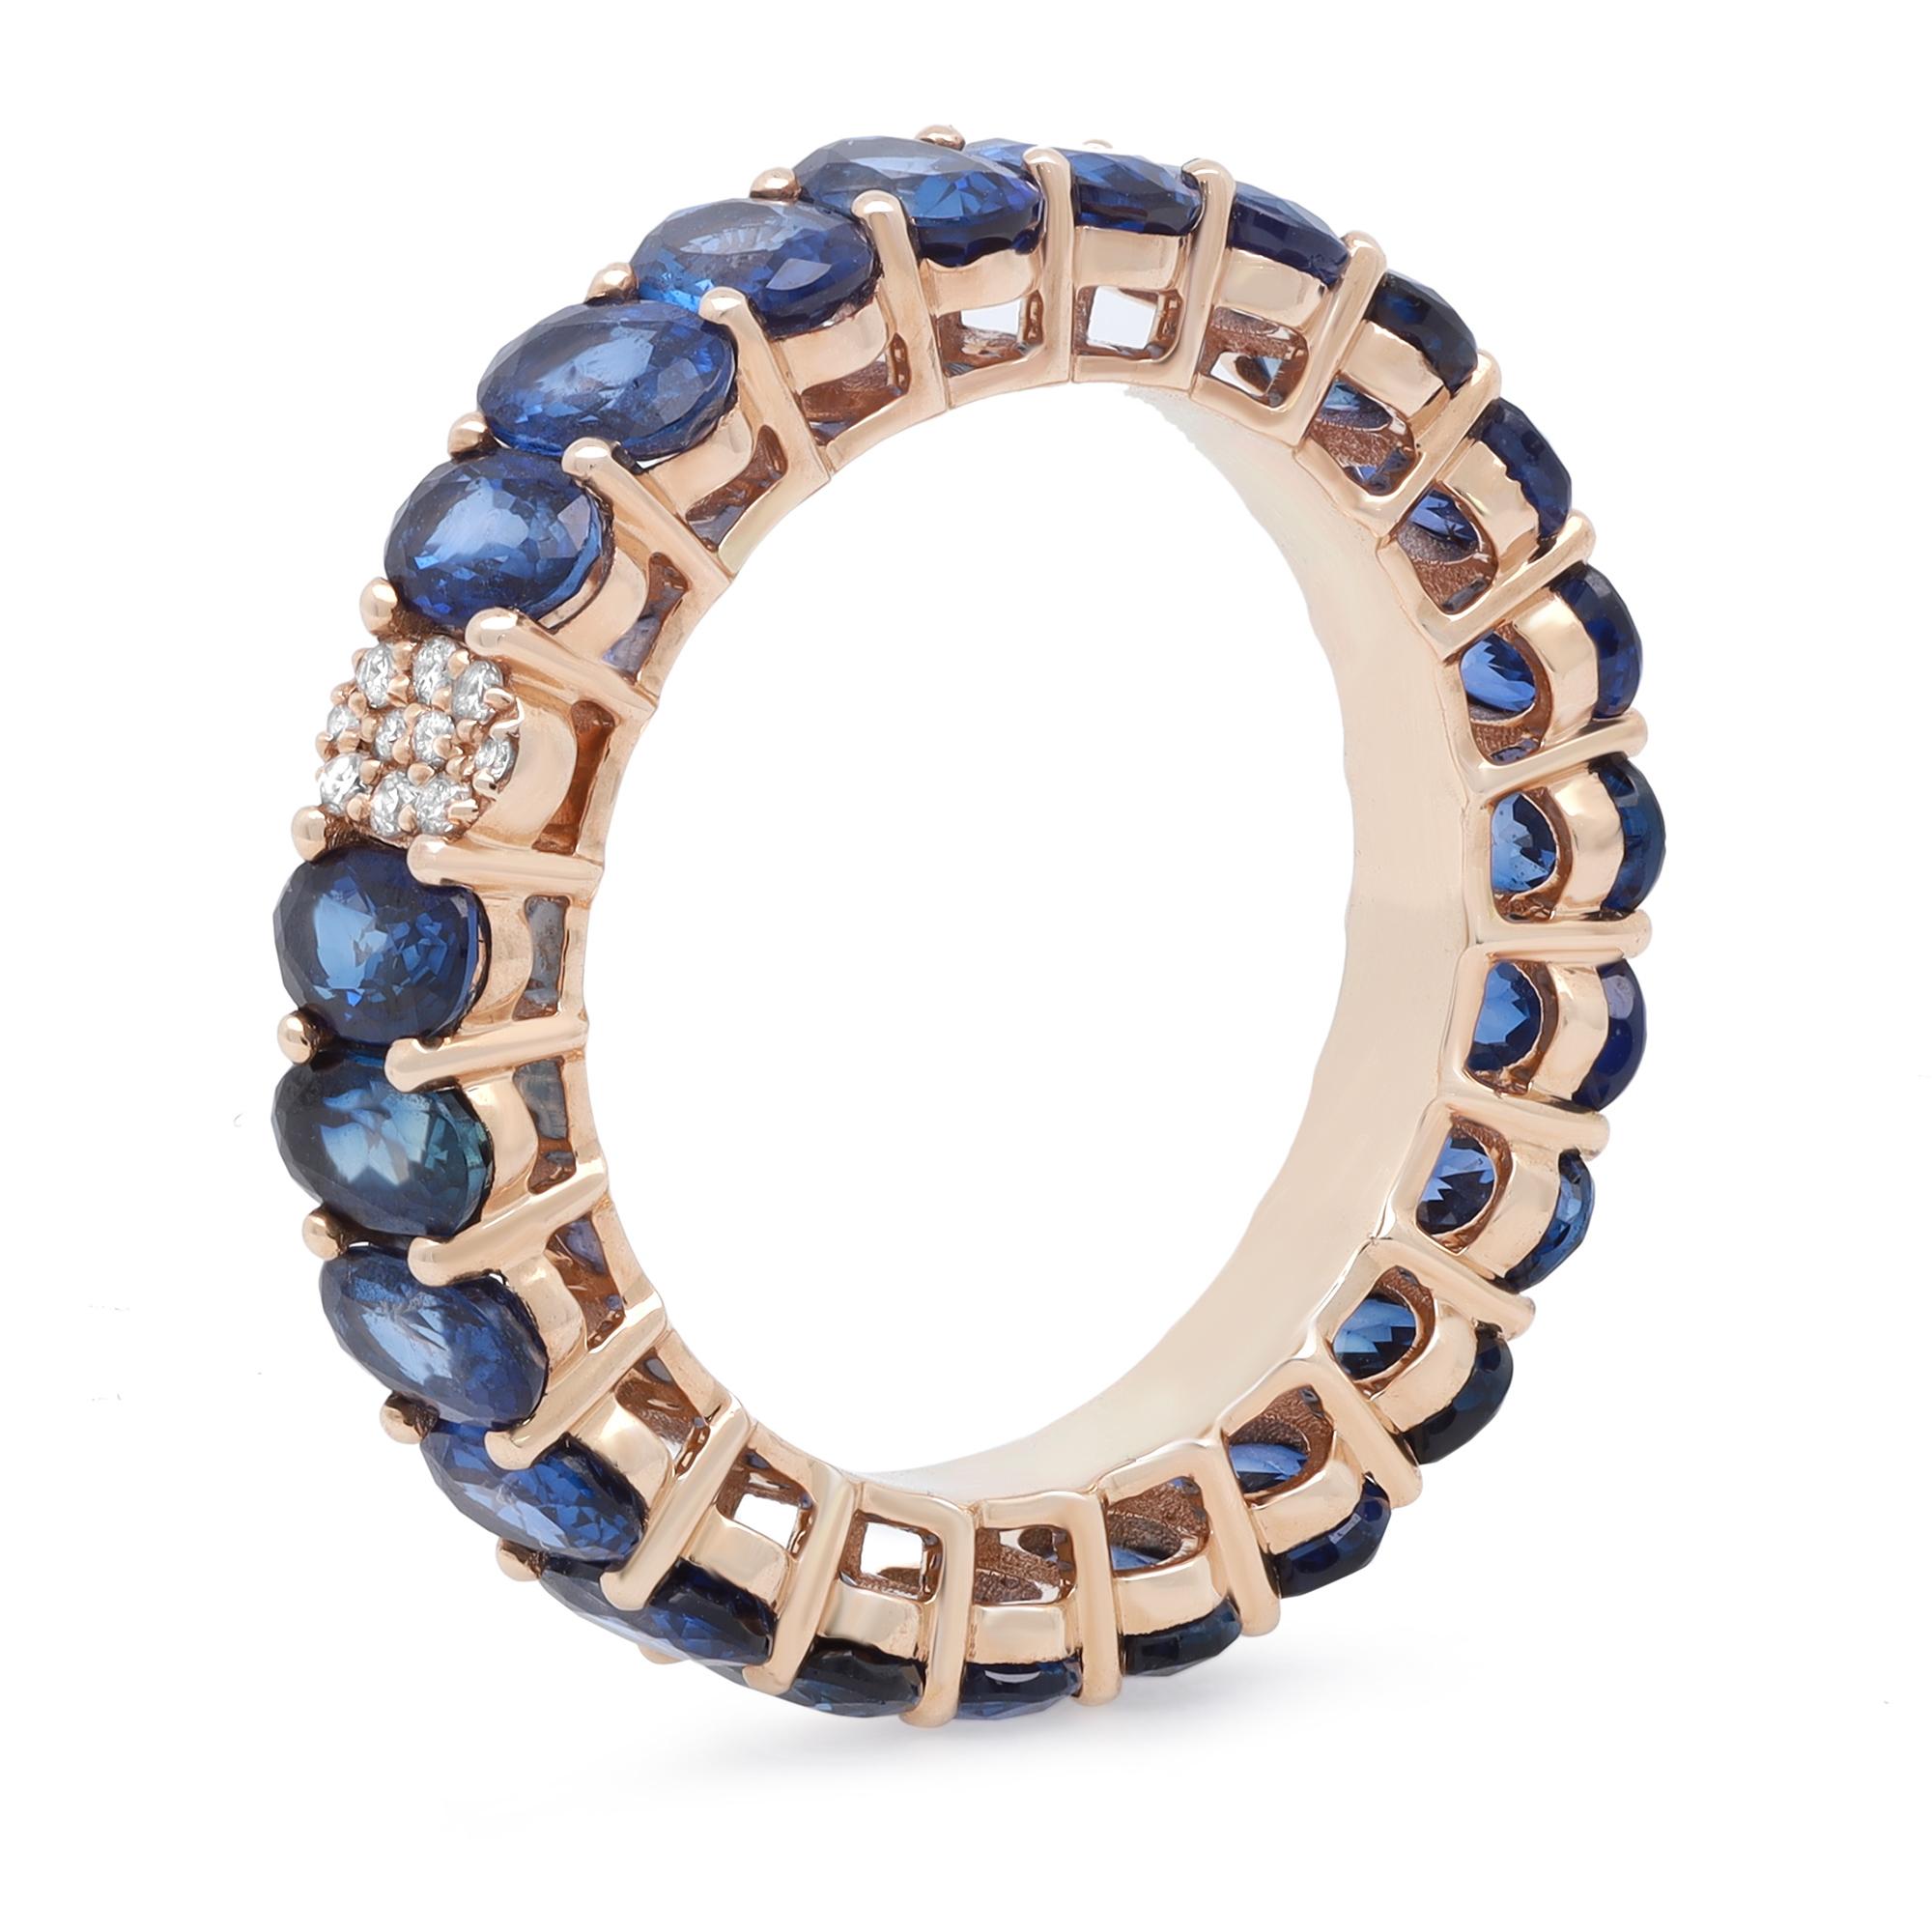 This beautiful eternity band features a pave set oval shank in the center with round cut diamonds and prong set oval cut Blue Sapphires beautifully circling all the way around the band. Crafted in fine 14k yellow gold. Blue Sapphire total carat